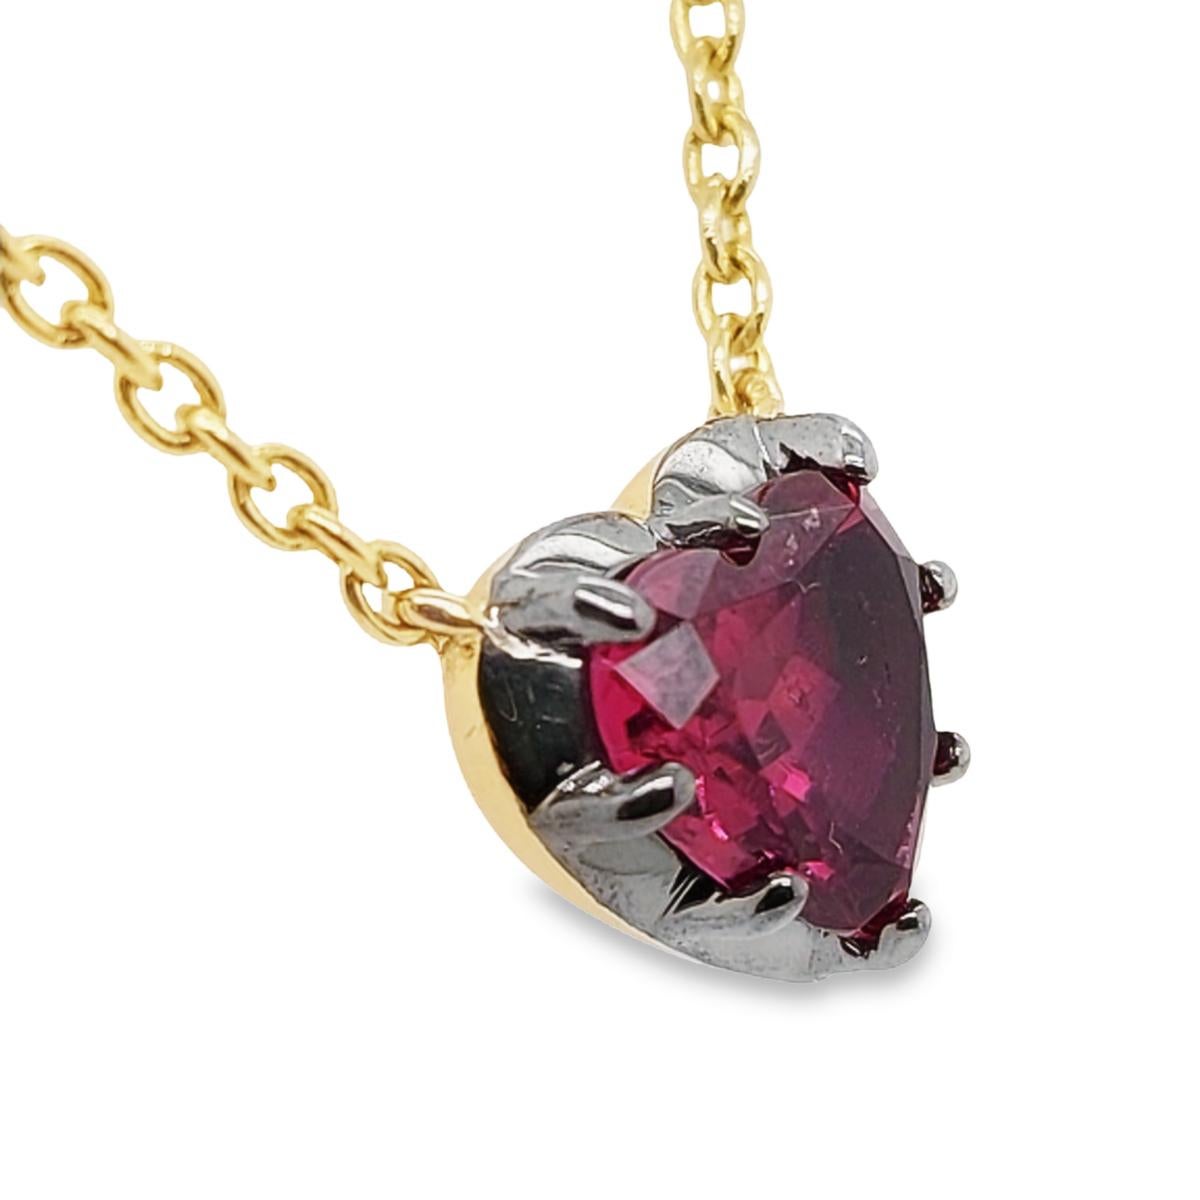 Made by Jewellery Cave- introducing the epitome of elegance and luxury gifting - our stunning 2.5ct Rubellite Tourmaline heart necklace set in 14ct Yellow Gold on a 16/18